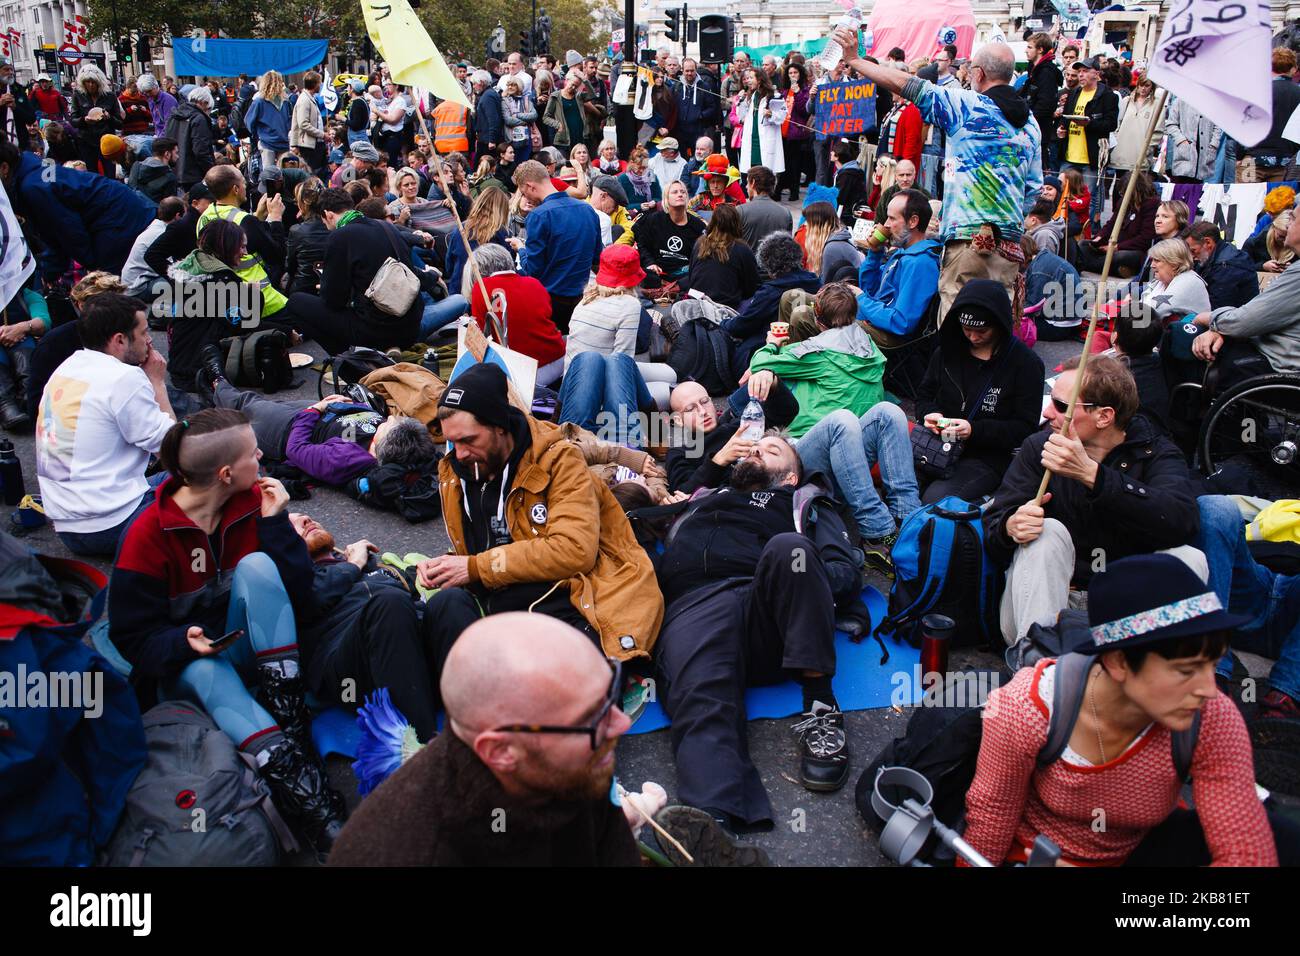 Members of climate change activist movement Extinction Rebellion (XR) listen to a talk on climate science at Trafalgar Square on the fourth day of the group's two-week 'International Rebellion' in London, England, on October 10, 2019. By lunchtime Thursday police had all but contained the demonstrations in Trafalgar Square and the roadways around it, where sizeable numbers of XR followers remained. A hearse carrying a coffin for 'Our Future', which had been parked at the Whitehall exit from the square since Monday, was removed early afternoon. (Photo by David Cliff/NurPhoto) Stock Photo